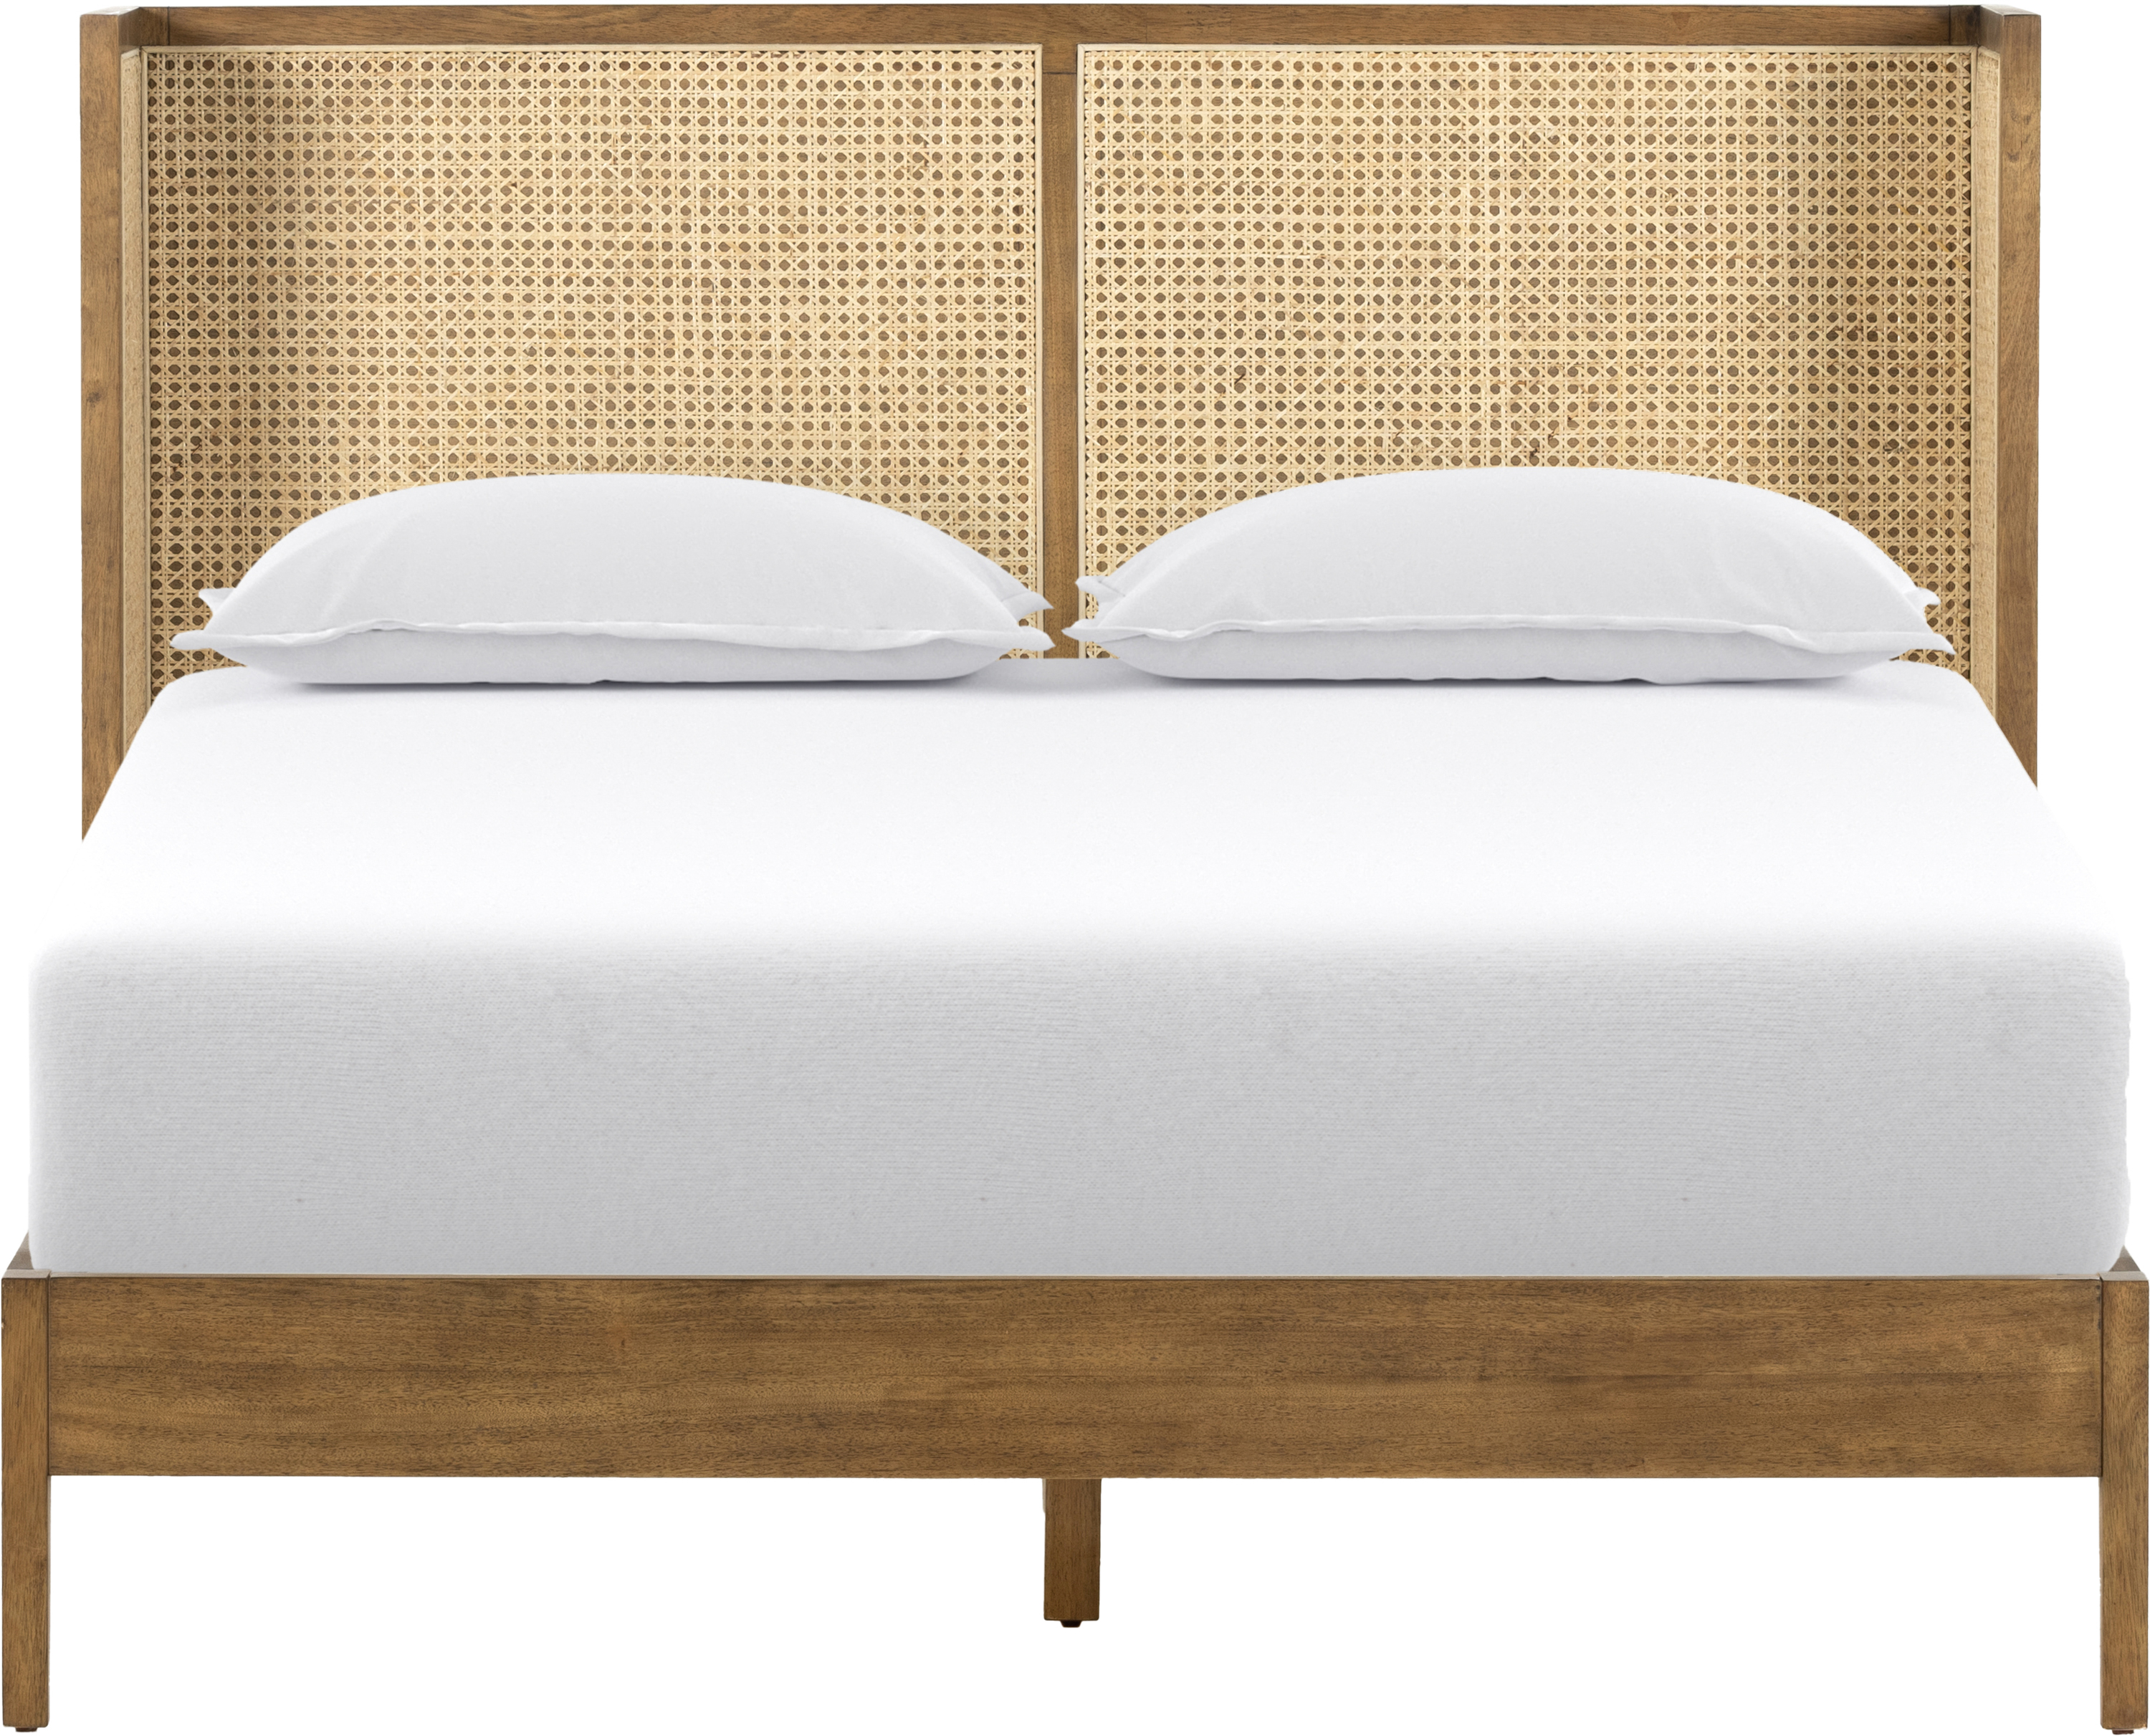 Four Hands - Antonia Cane Bed - Toasted Parawood - Queen